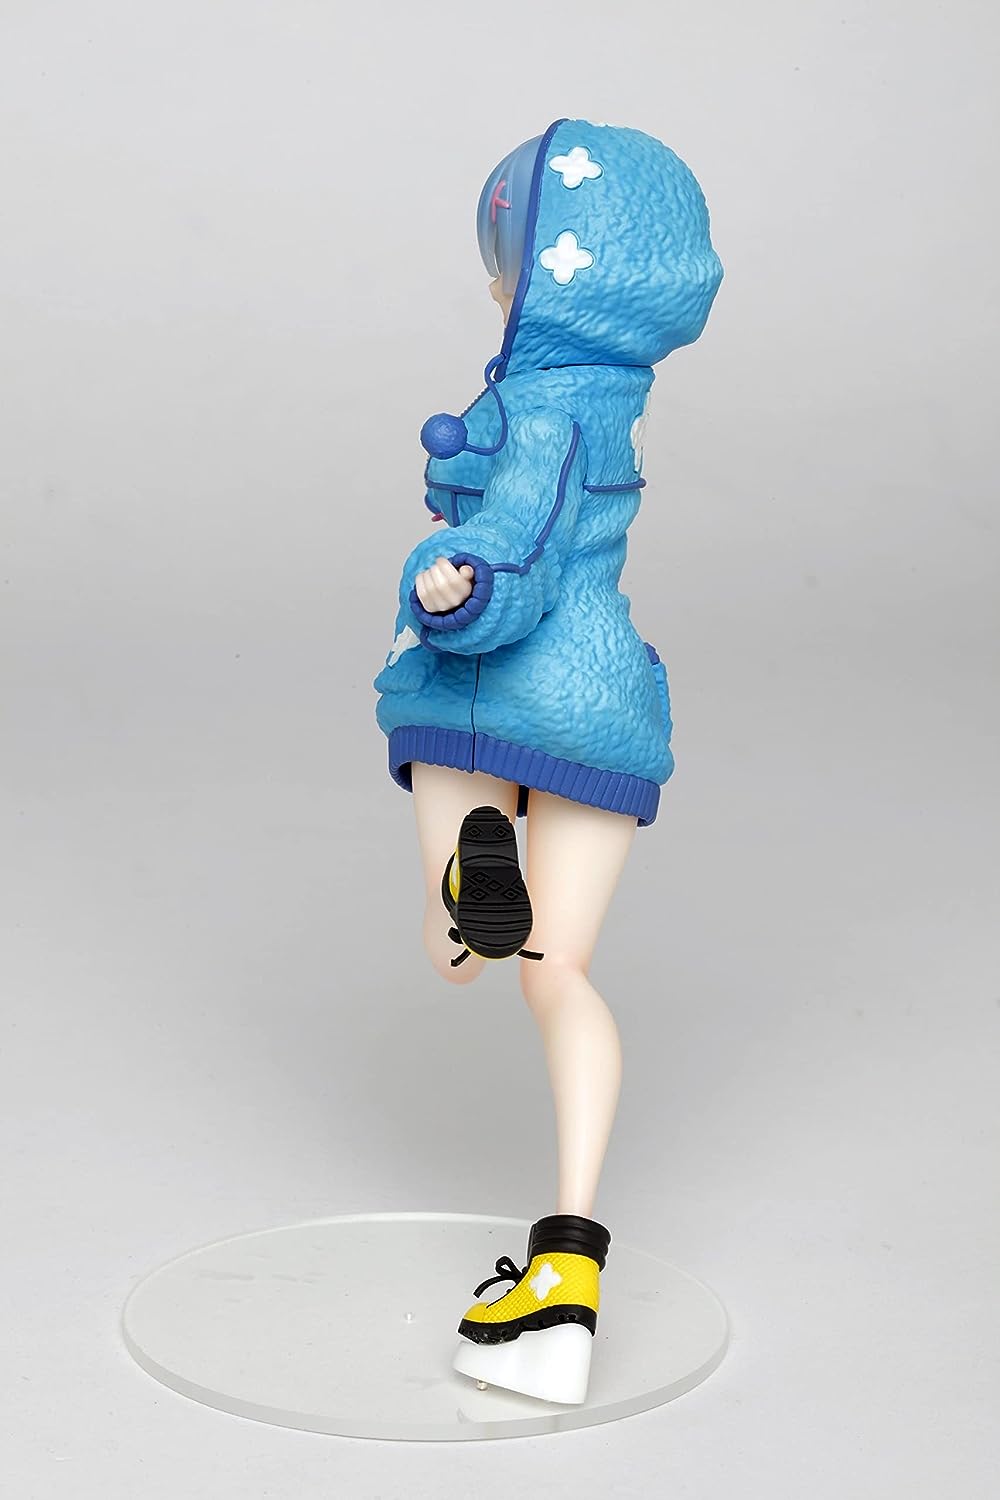 Re:Zero - Starting Life in Another World - Precious Figures - Rem - Fluffy Hoodie Ver. | animota